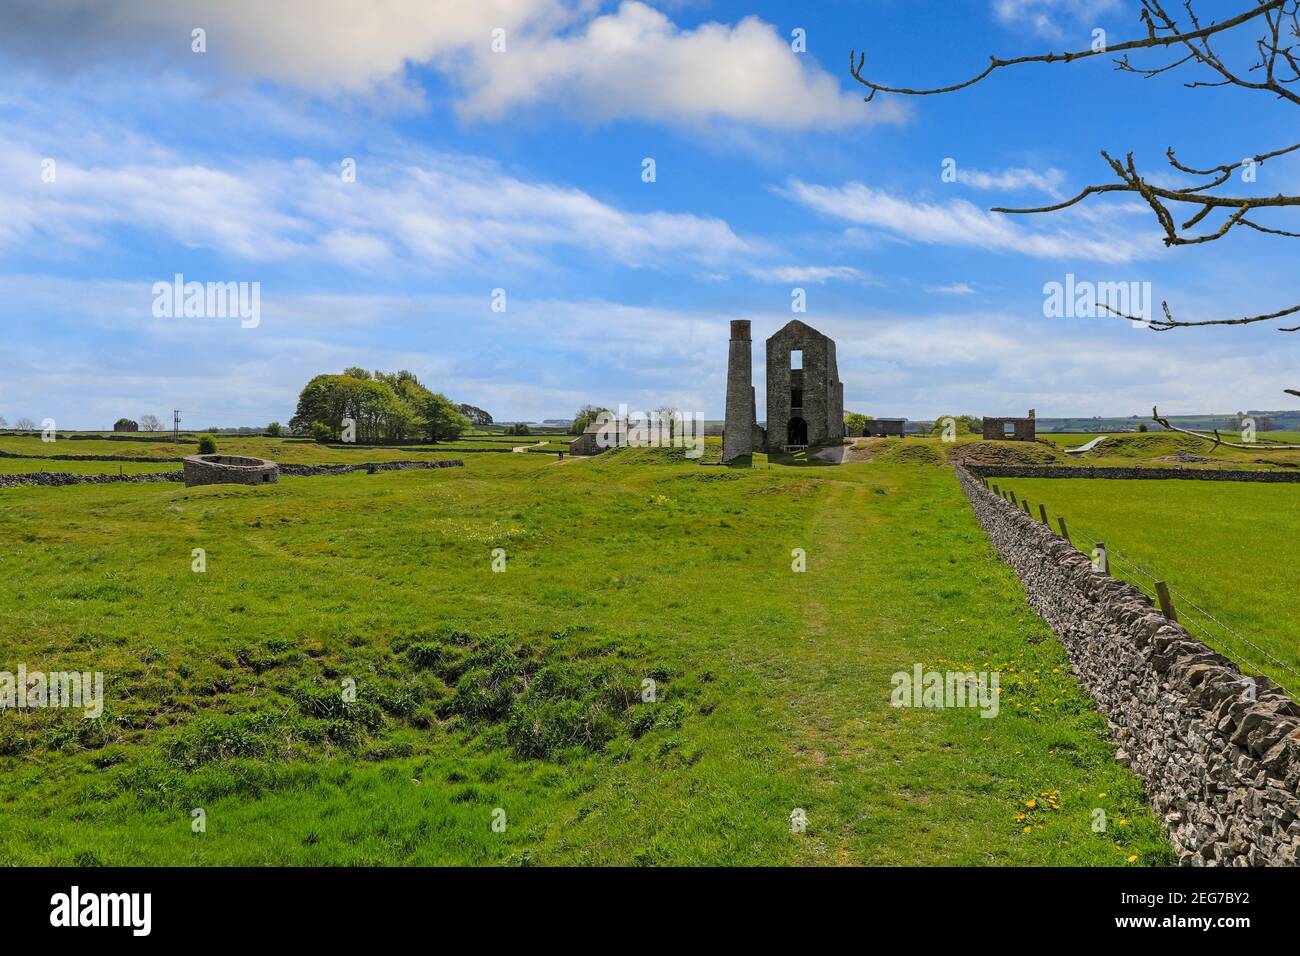 The Engine House at Magpie Mine, a well-preserved disused lead mine, Sheldon, Derbyshire, England, UK Stock Photo